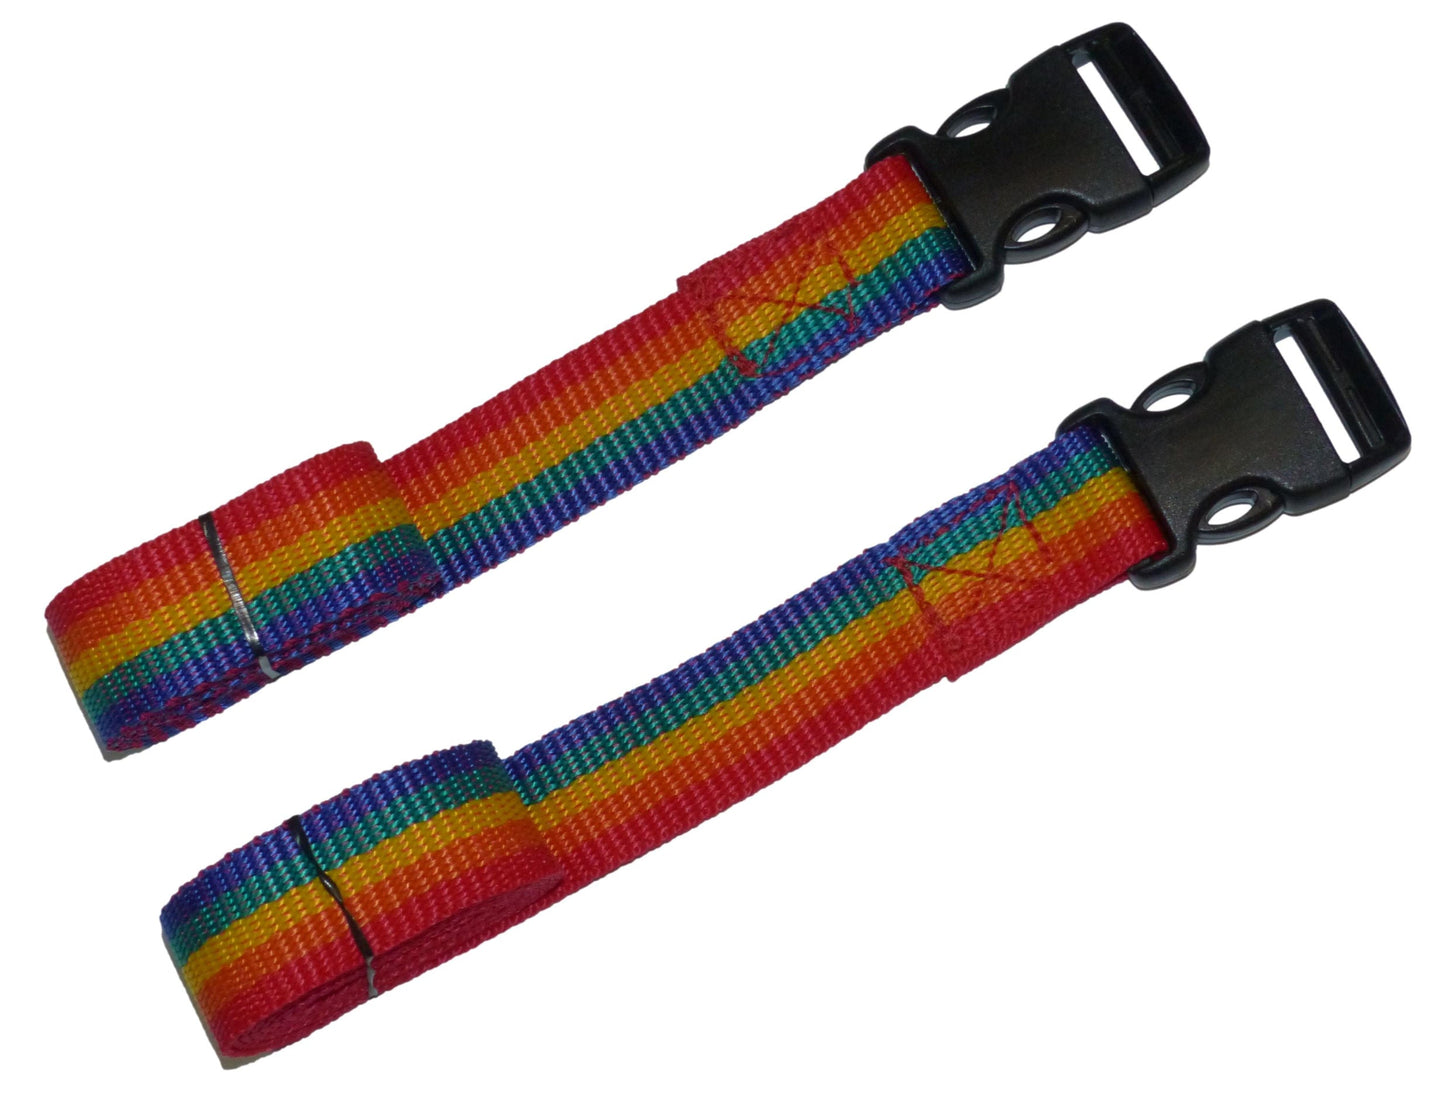 Benristraps 2 Pack Webbing Straps with Clips - Adjustable Luggage Straps in rainbow colours